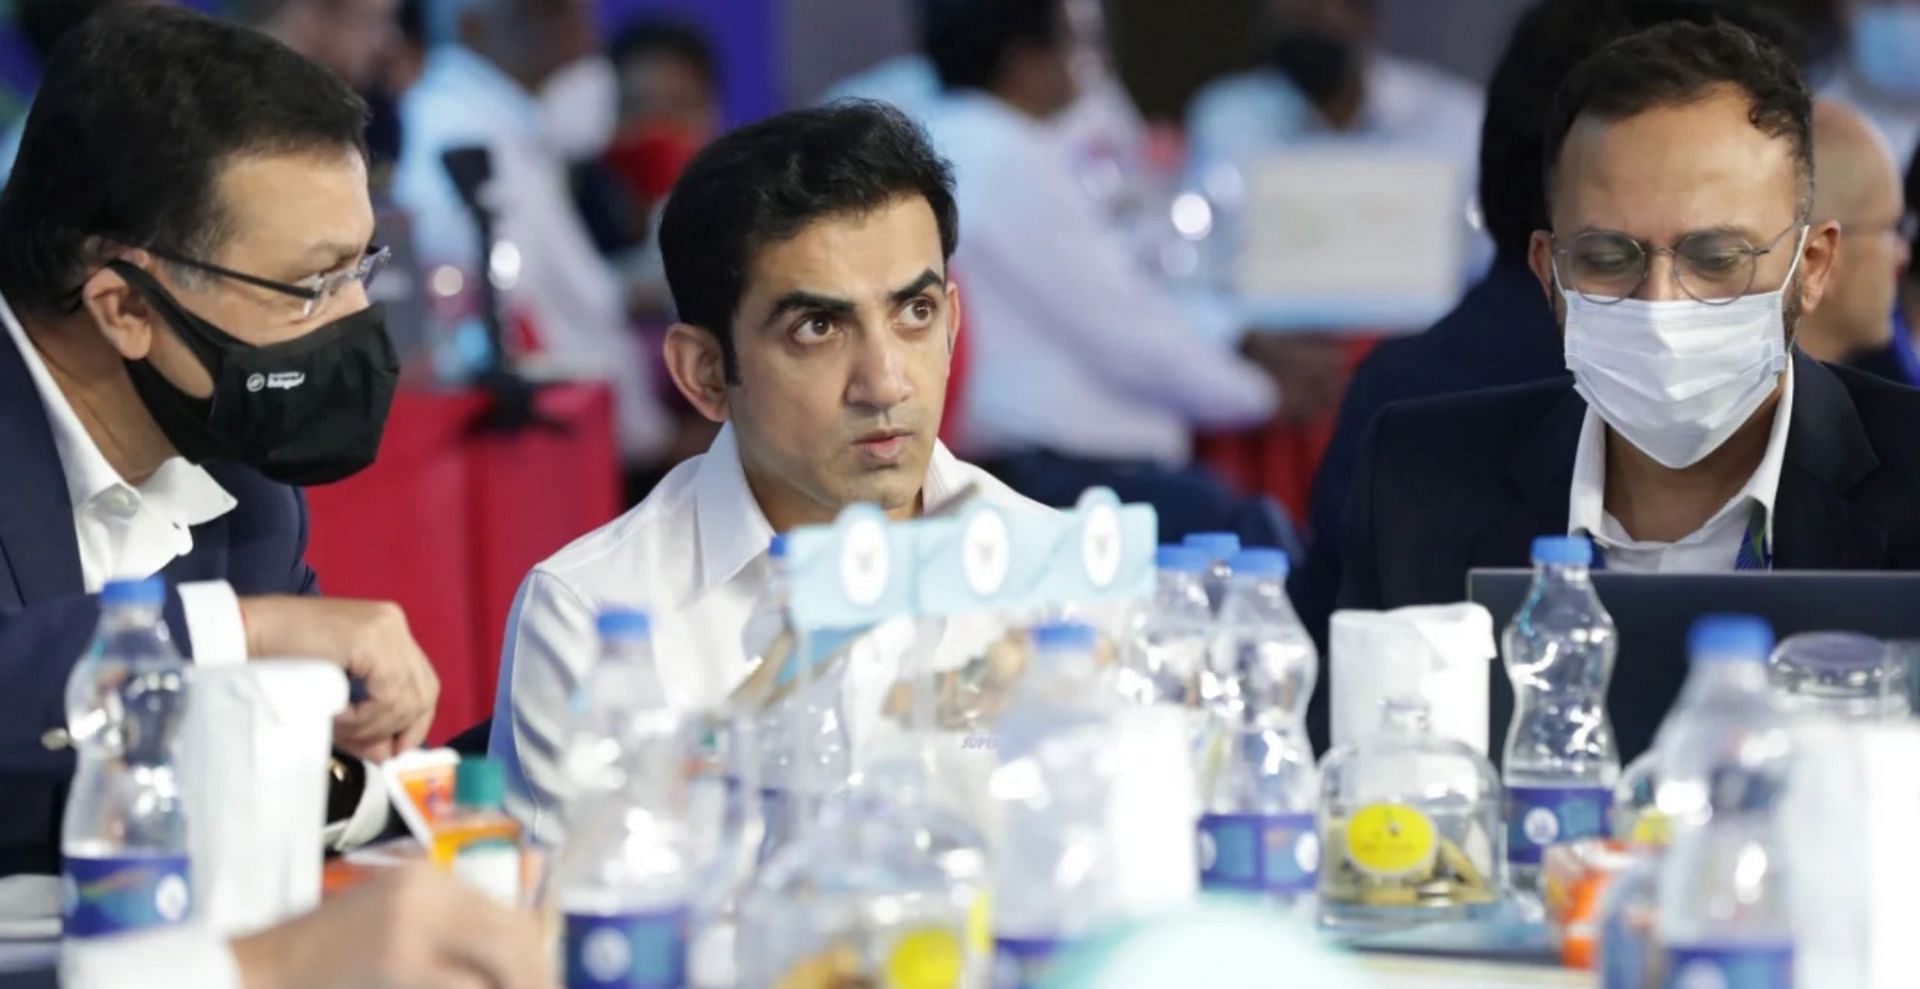 The Lucknow Super Giants table at the IPL 2022 auction (Credit: BCCI/IPL)